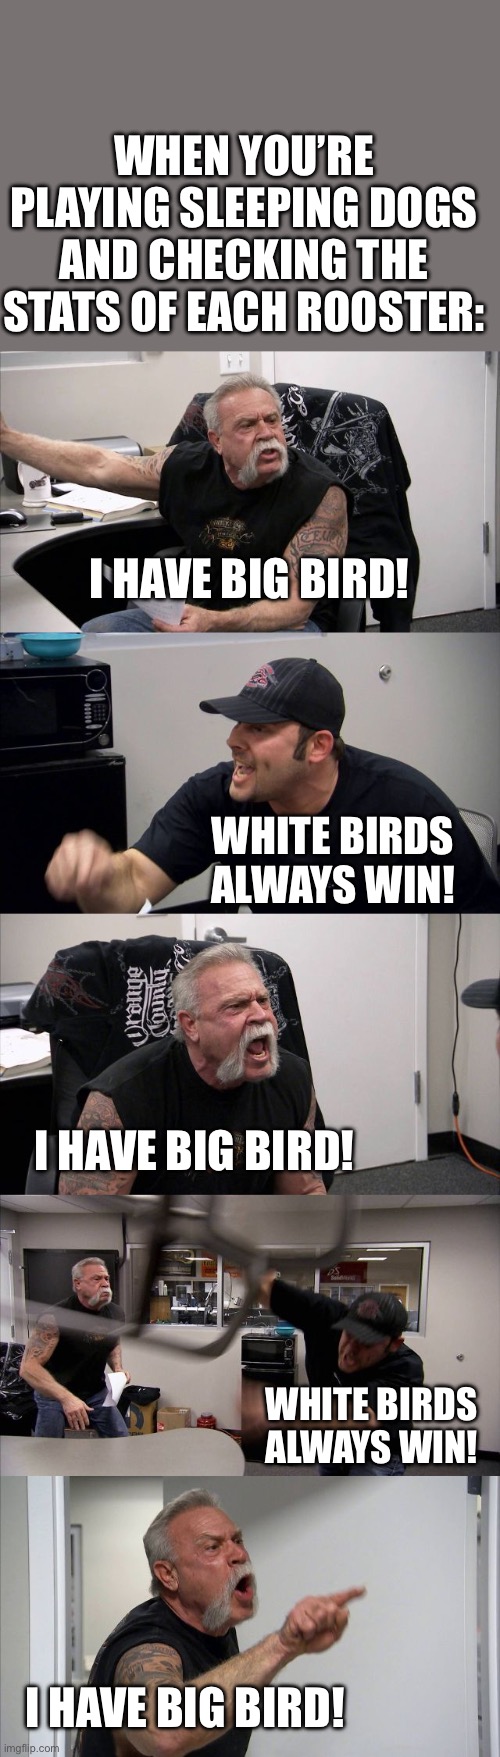 Cockfight moment | WHEN YOU’RE PLAYING SLEEPING DOGS AND CHECKING THE STATS OF EACH ROOSTER:; I HAVE BIG BIRD! WHITE BIRDS ALWAYS WIN! I HAVE BIG BIRD! WHITE BIRDS ALWAYS WIN! I HAVE BIG BIRD! | image tagged in memes,american chopper argument,sleeping dogs,gaming,hong kong,cockfight | made w/ Imgflip meme maker